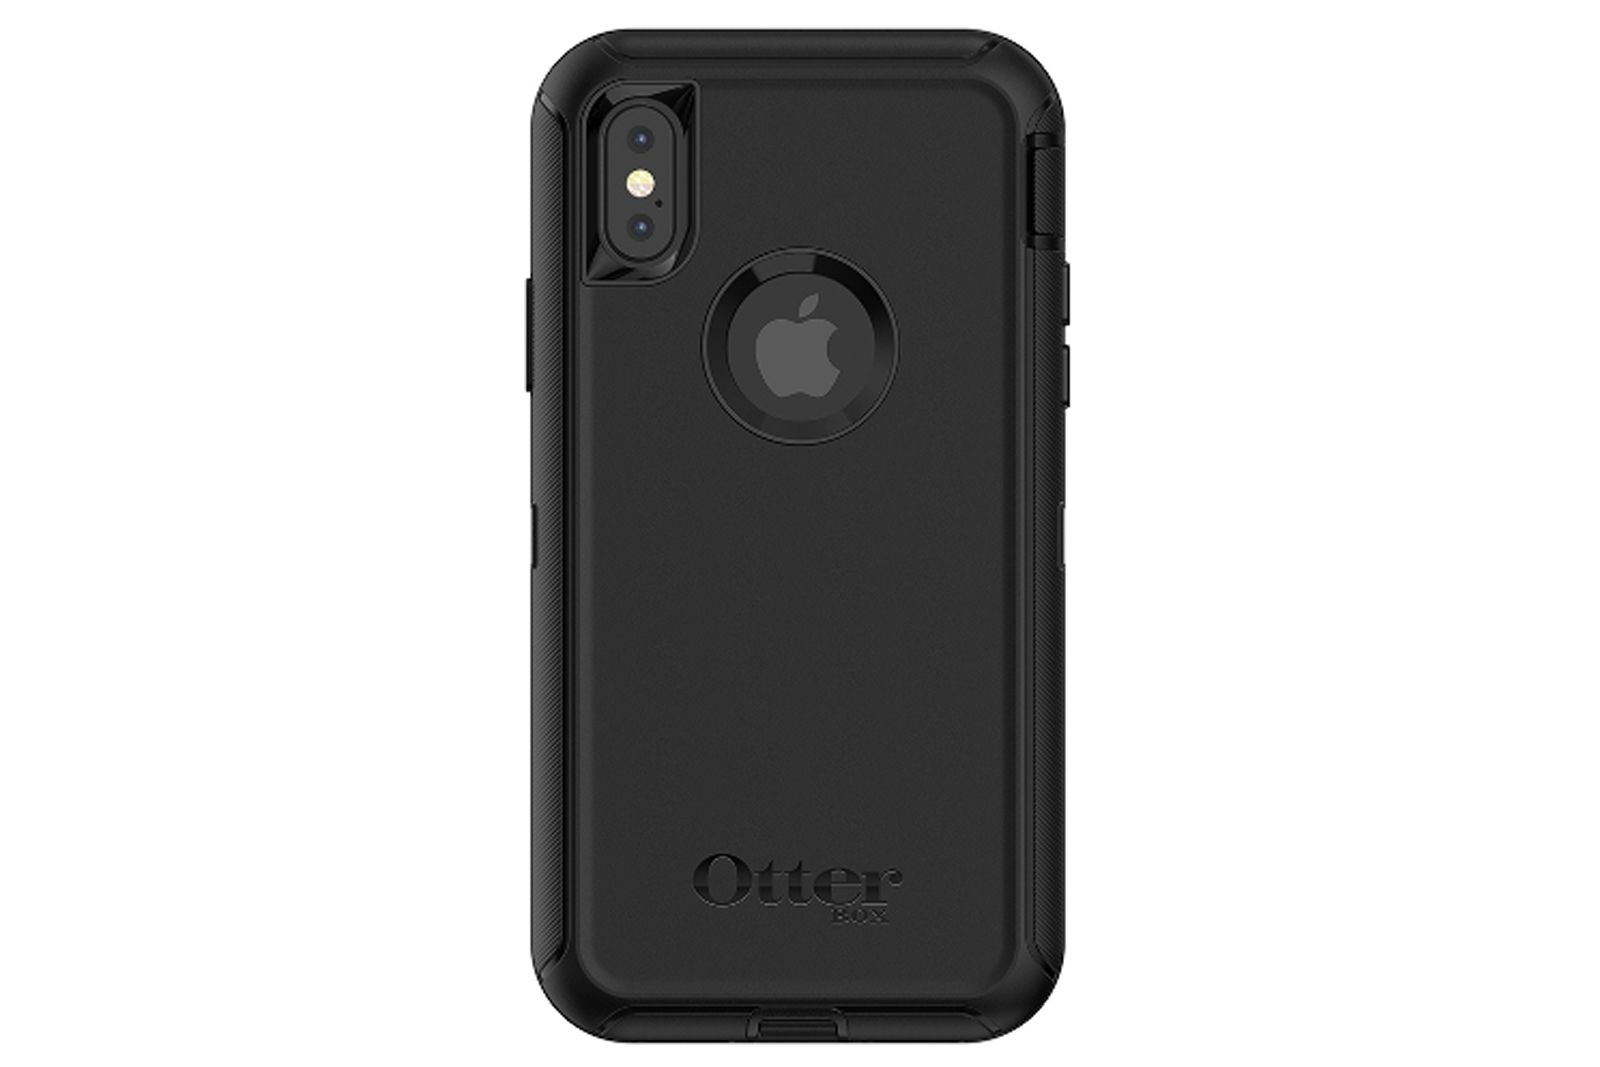 Best Iphone X Cases Protect Your New Apple Device image 11